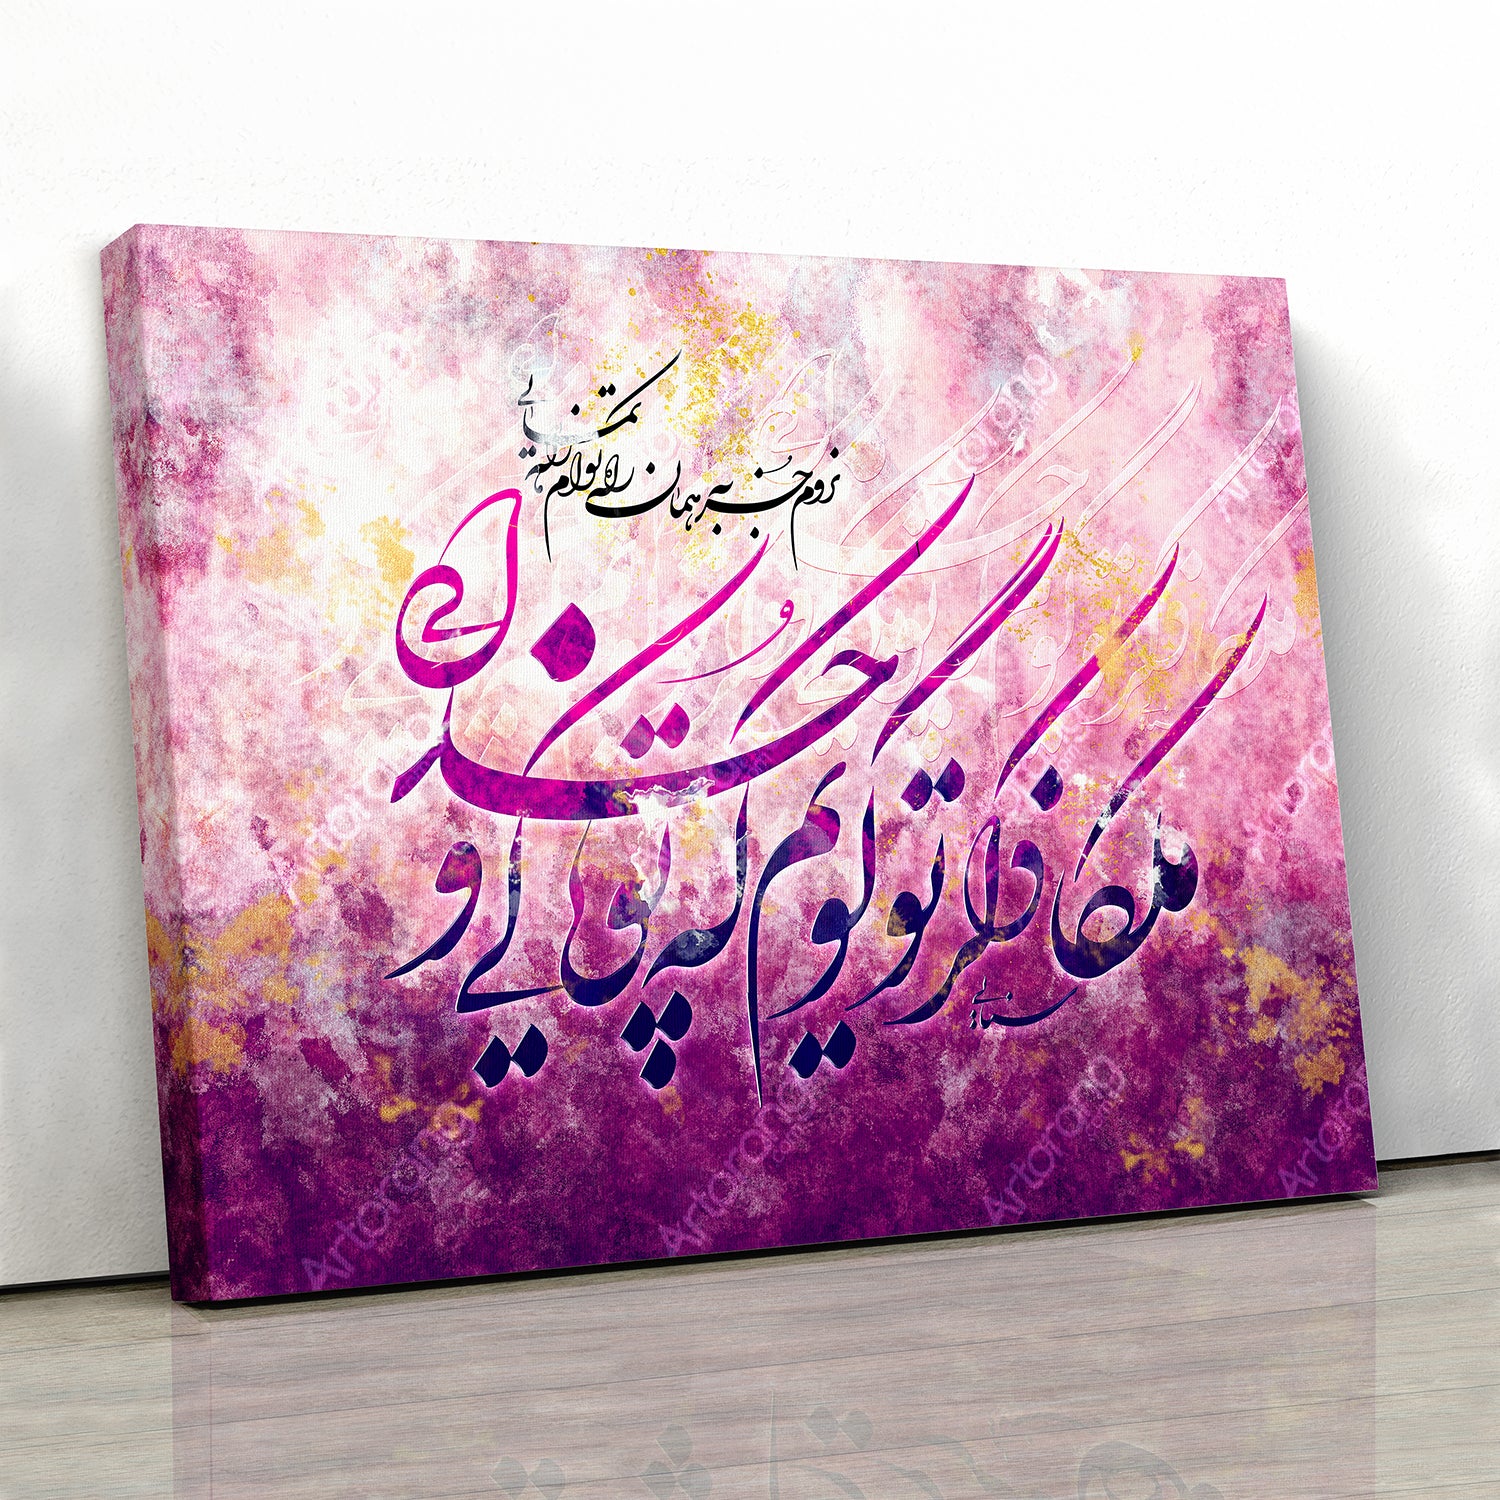 The path you guide me, Sanai quote with Persian calligraphy wall art - Artorang